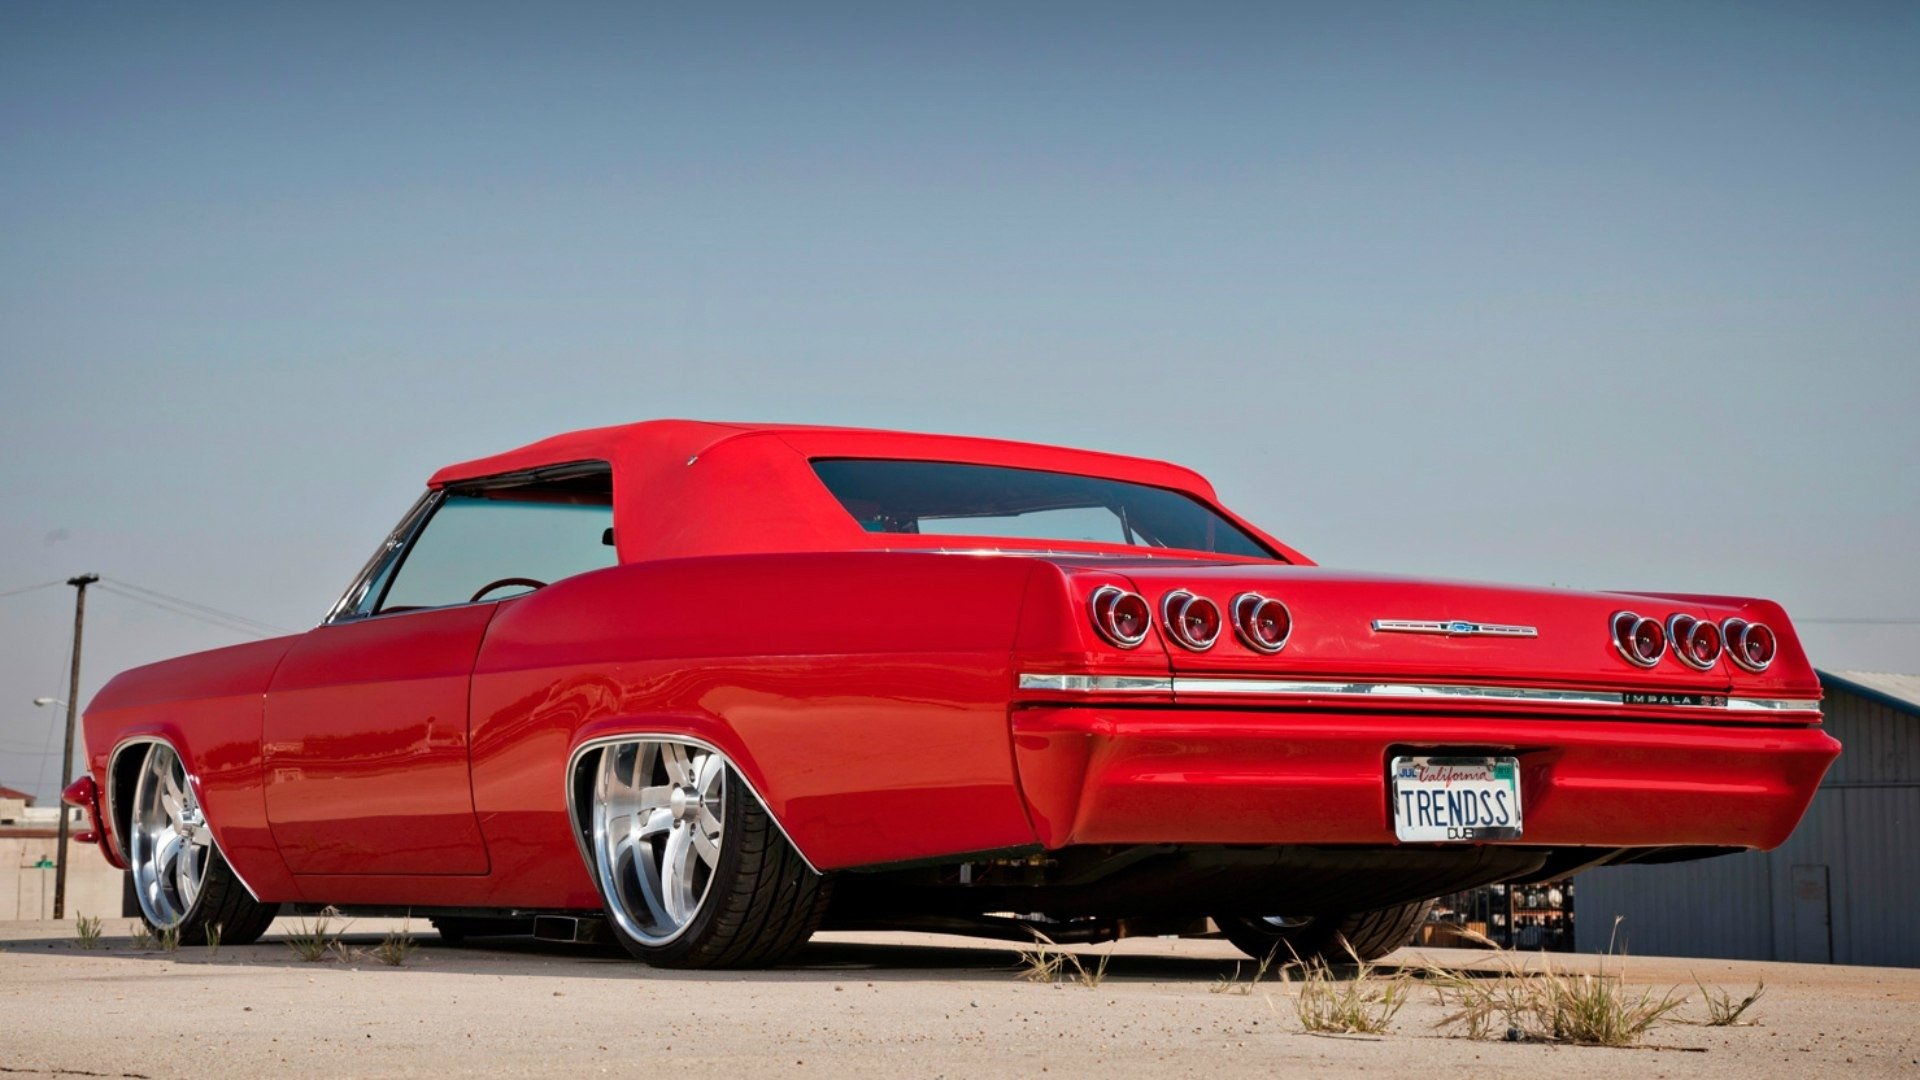 Chevrolet Impala Full HD Wallpaper And Background